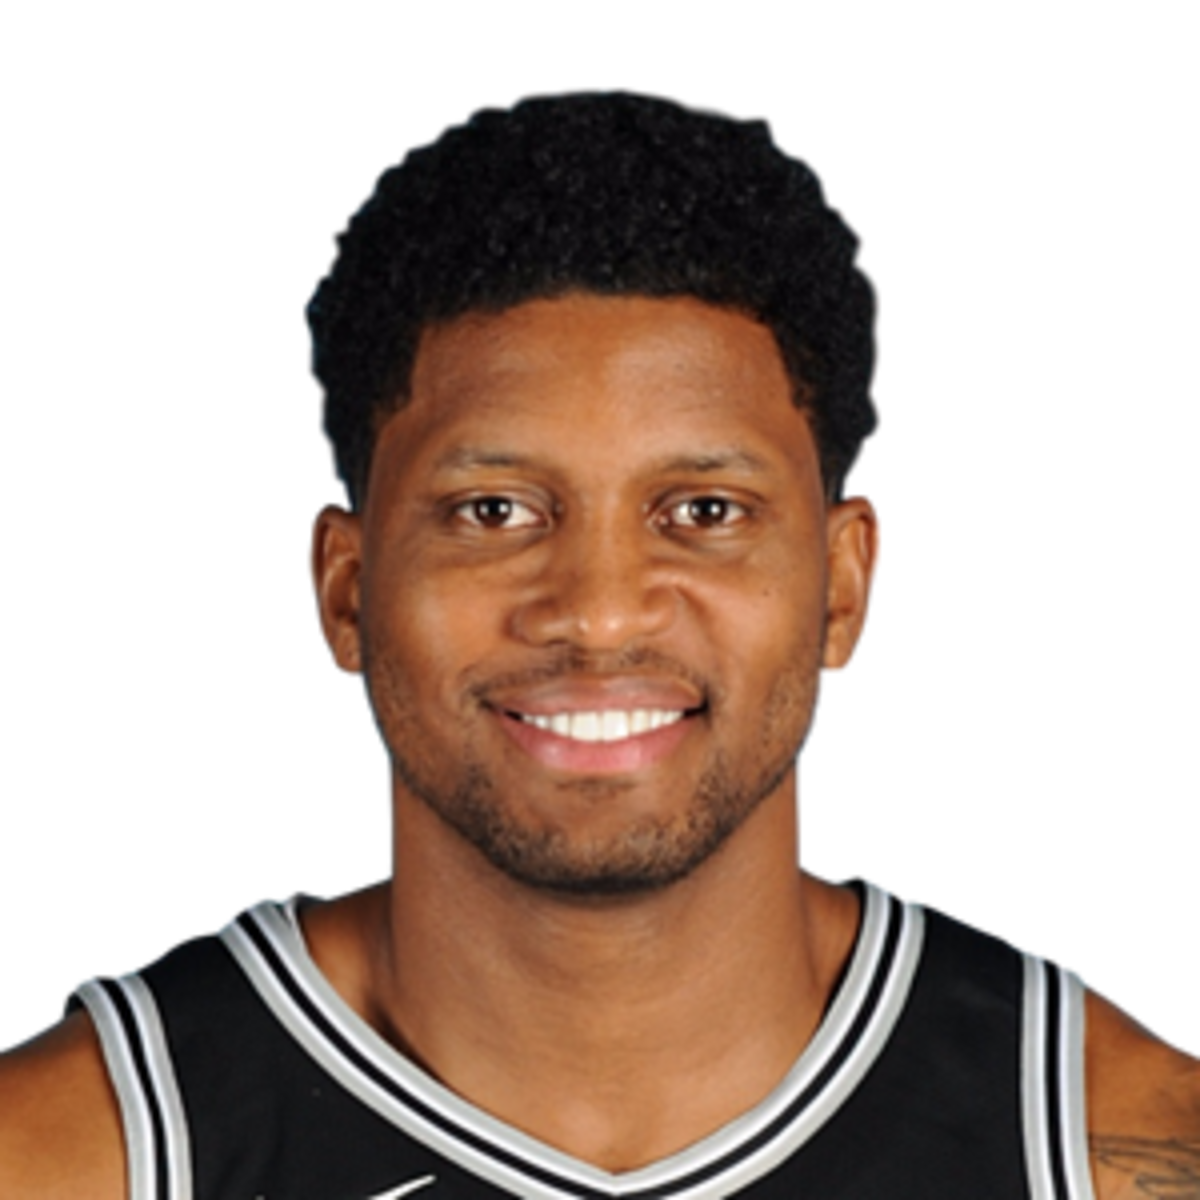 rudy gay stats since 2006